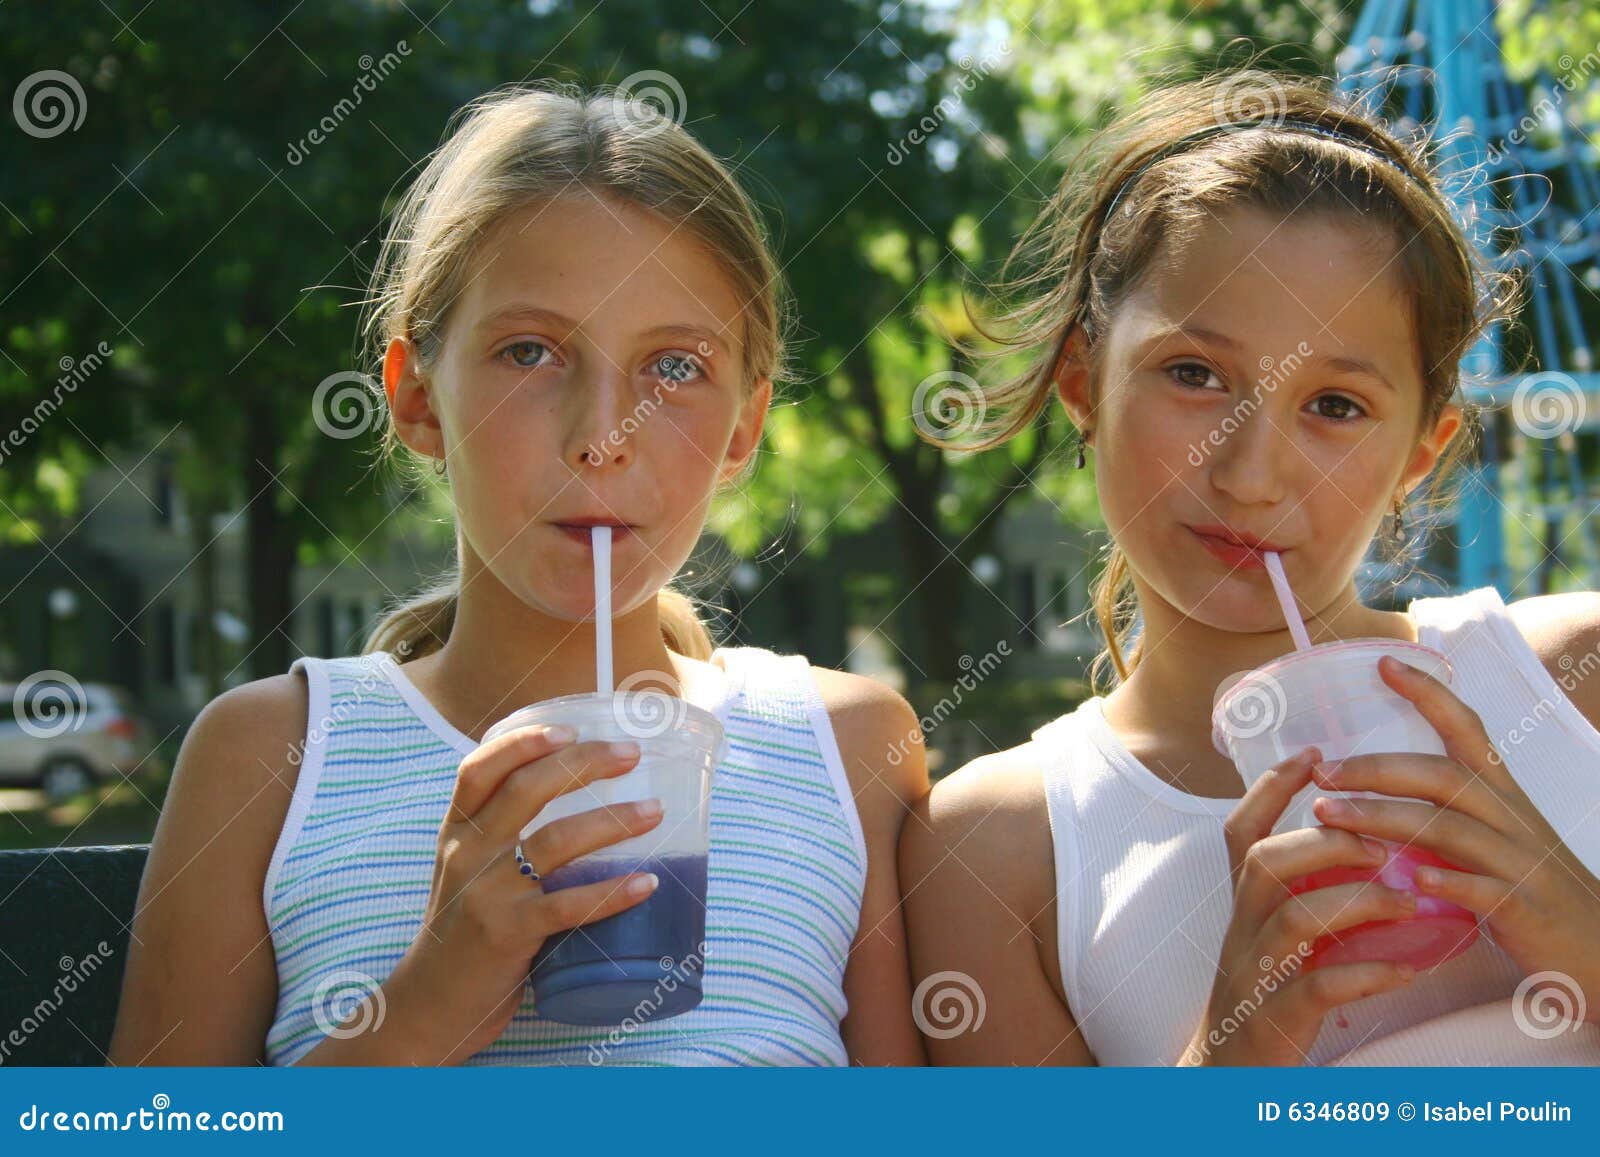 girls with takeout drinks